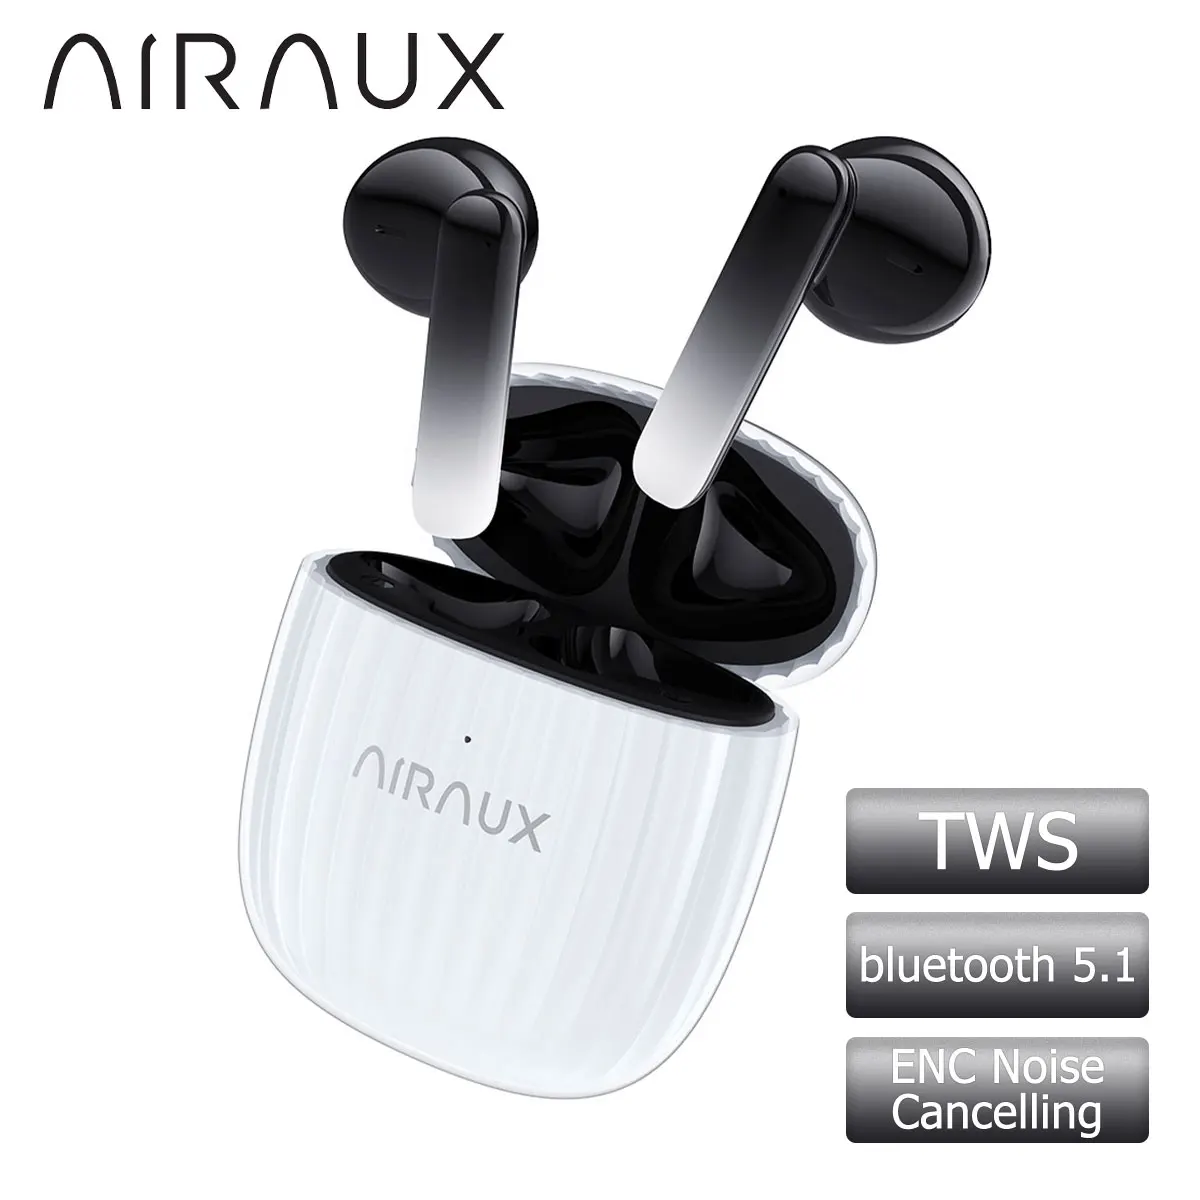 

AirAux AA-UM13 TWS bluetooth V5.1 Earphones Noise Cancelling IPX4 Waterproof Headset Support Voice Assistant ENC Noise Reduction